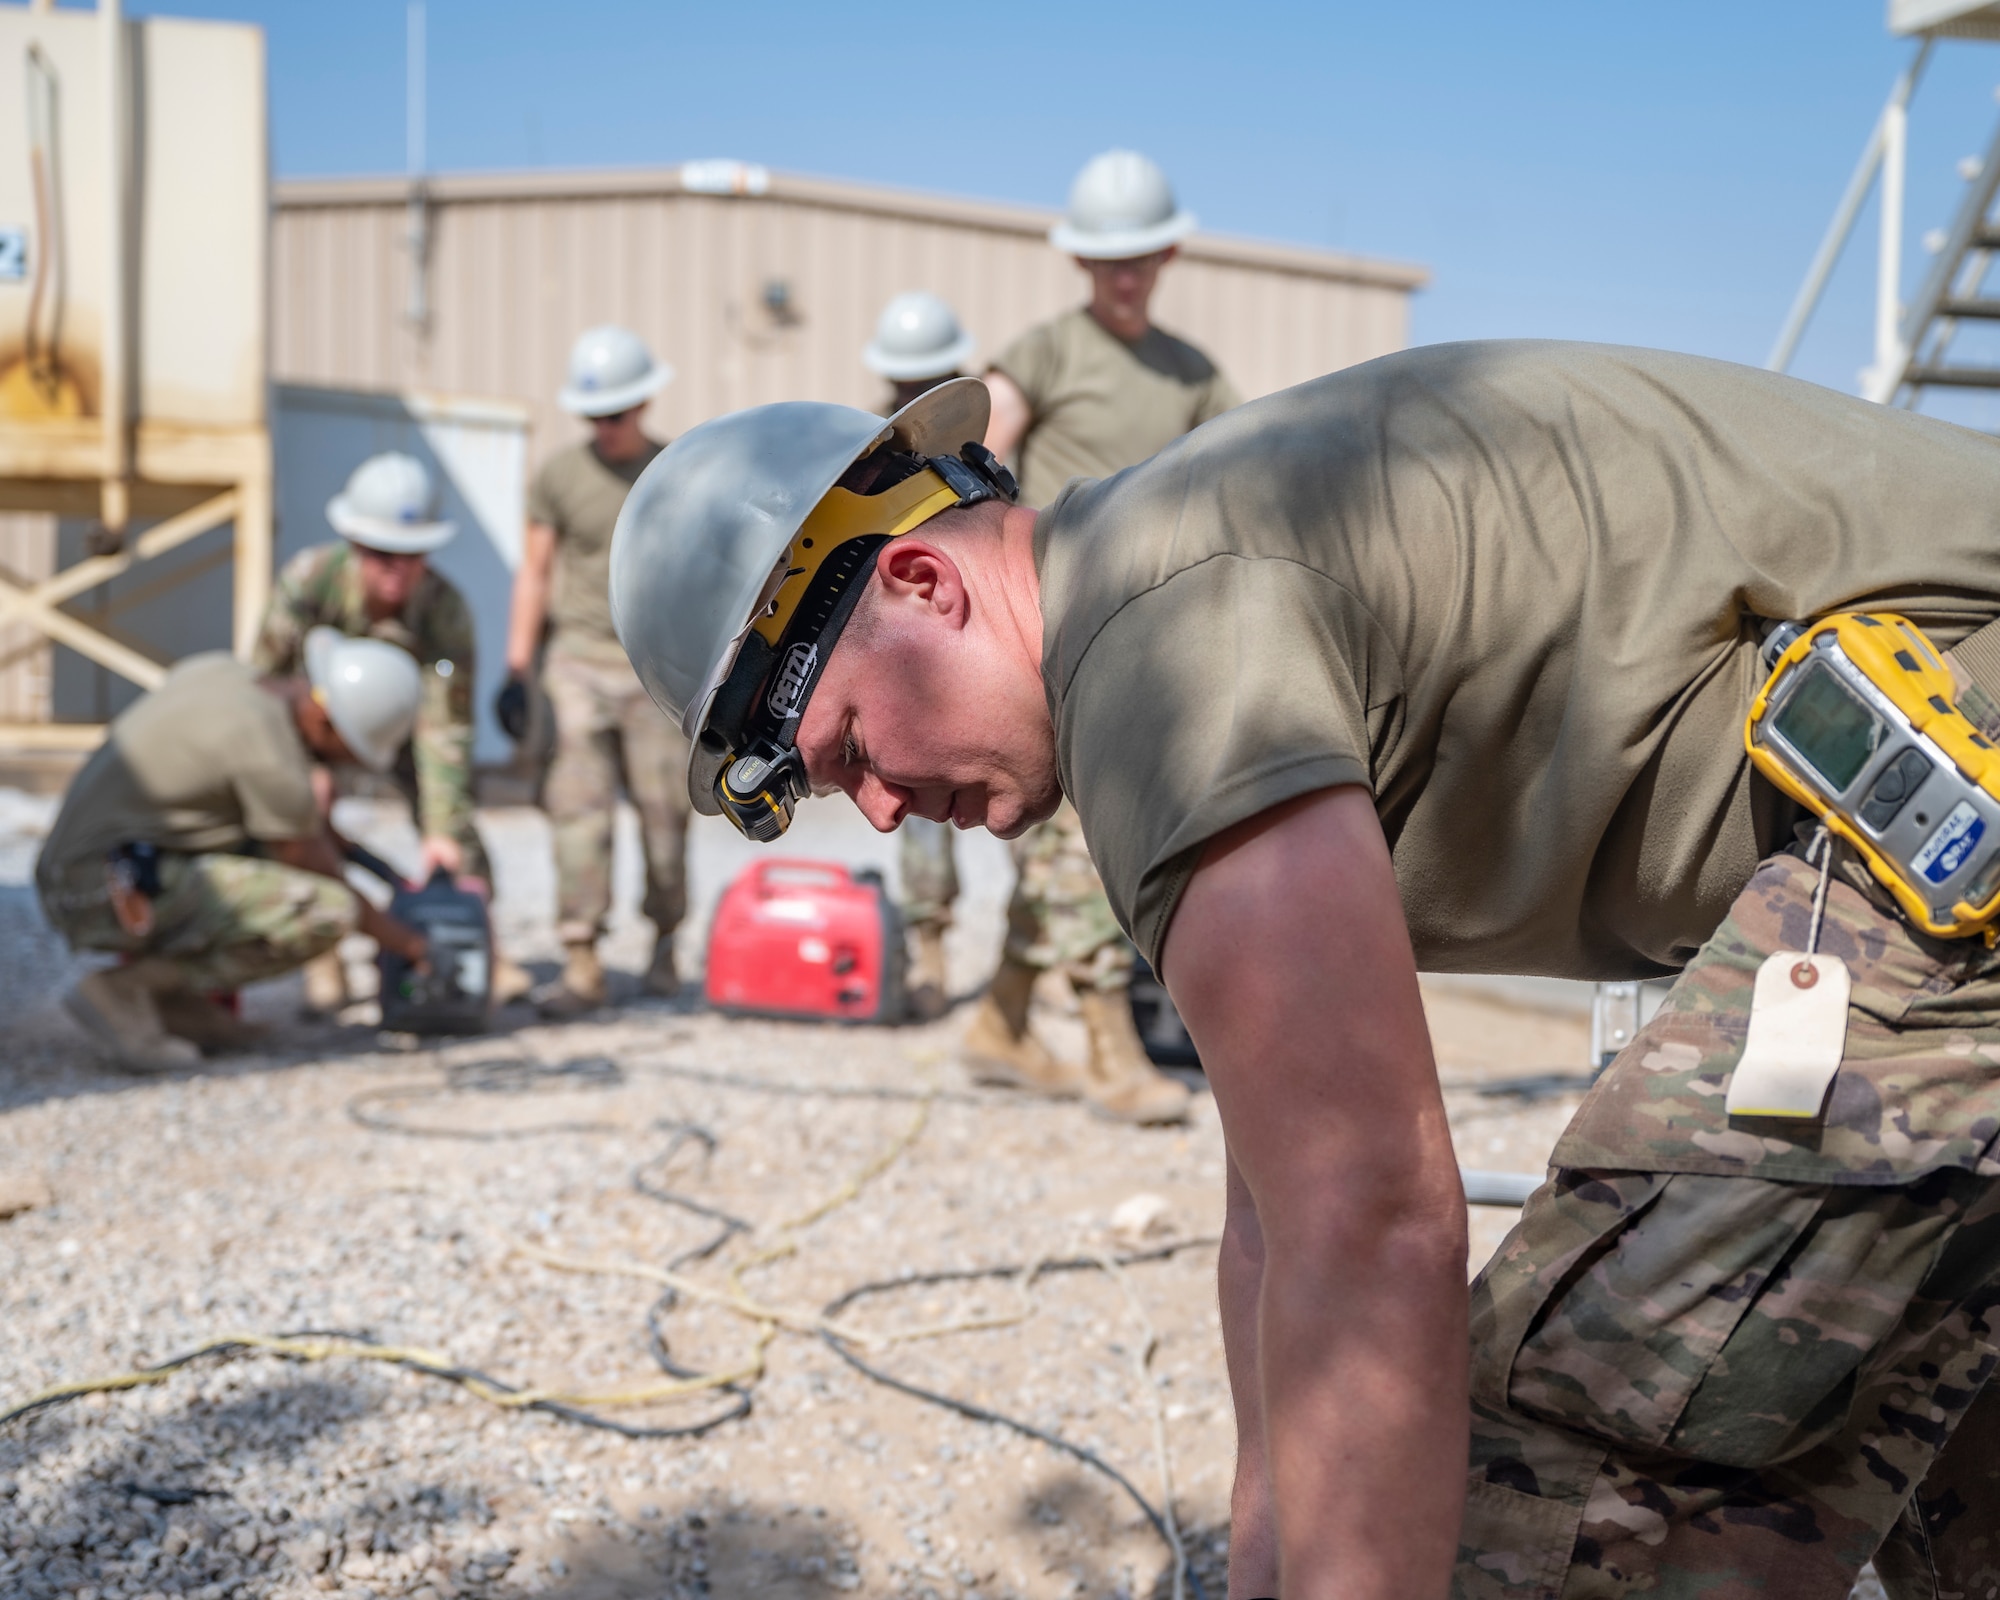 A member of the U.S. Air Forces Central, Air Force Forces A67 Engineering and Installation team checks equipment as his teammates start a generator at Ali Al Salem Air Base, Kuwait, Oct. 19, 2021.